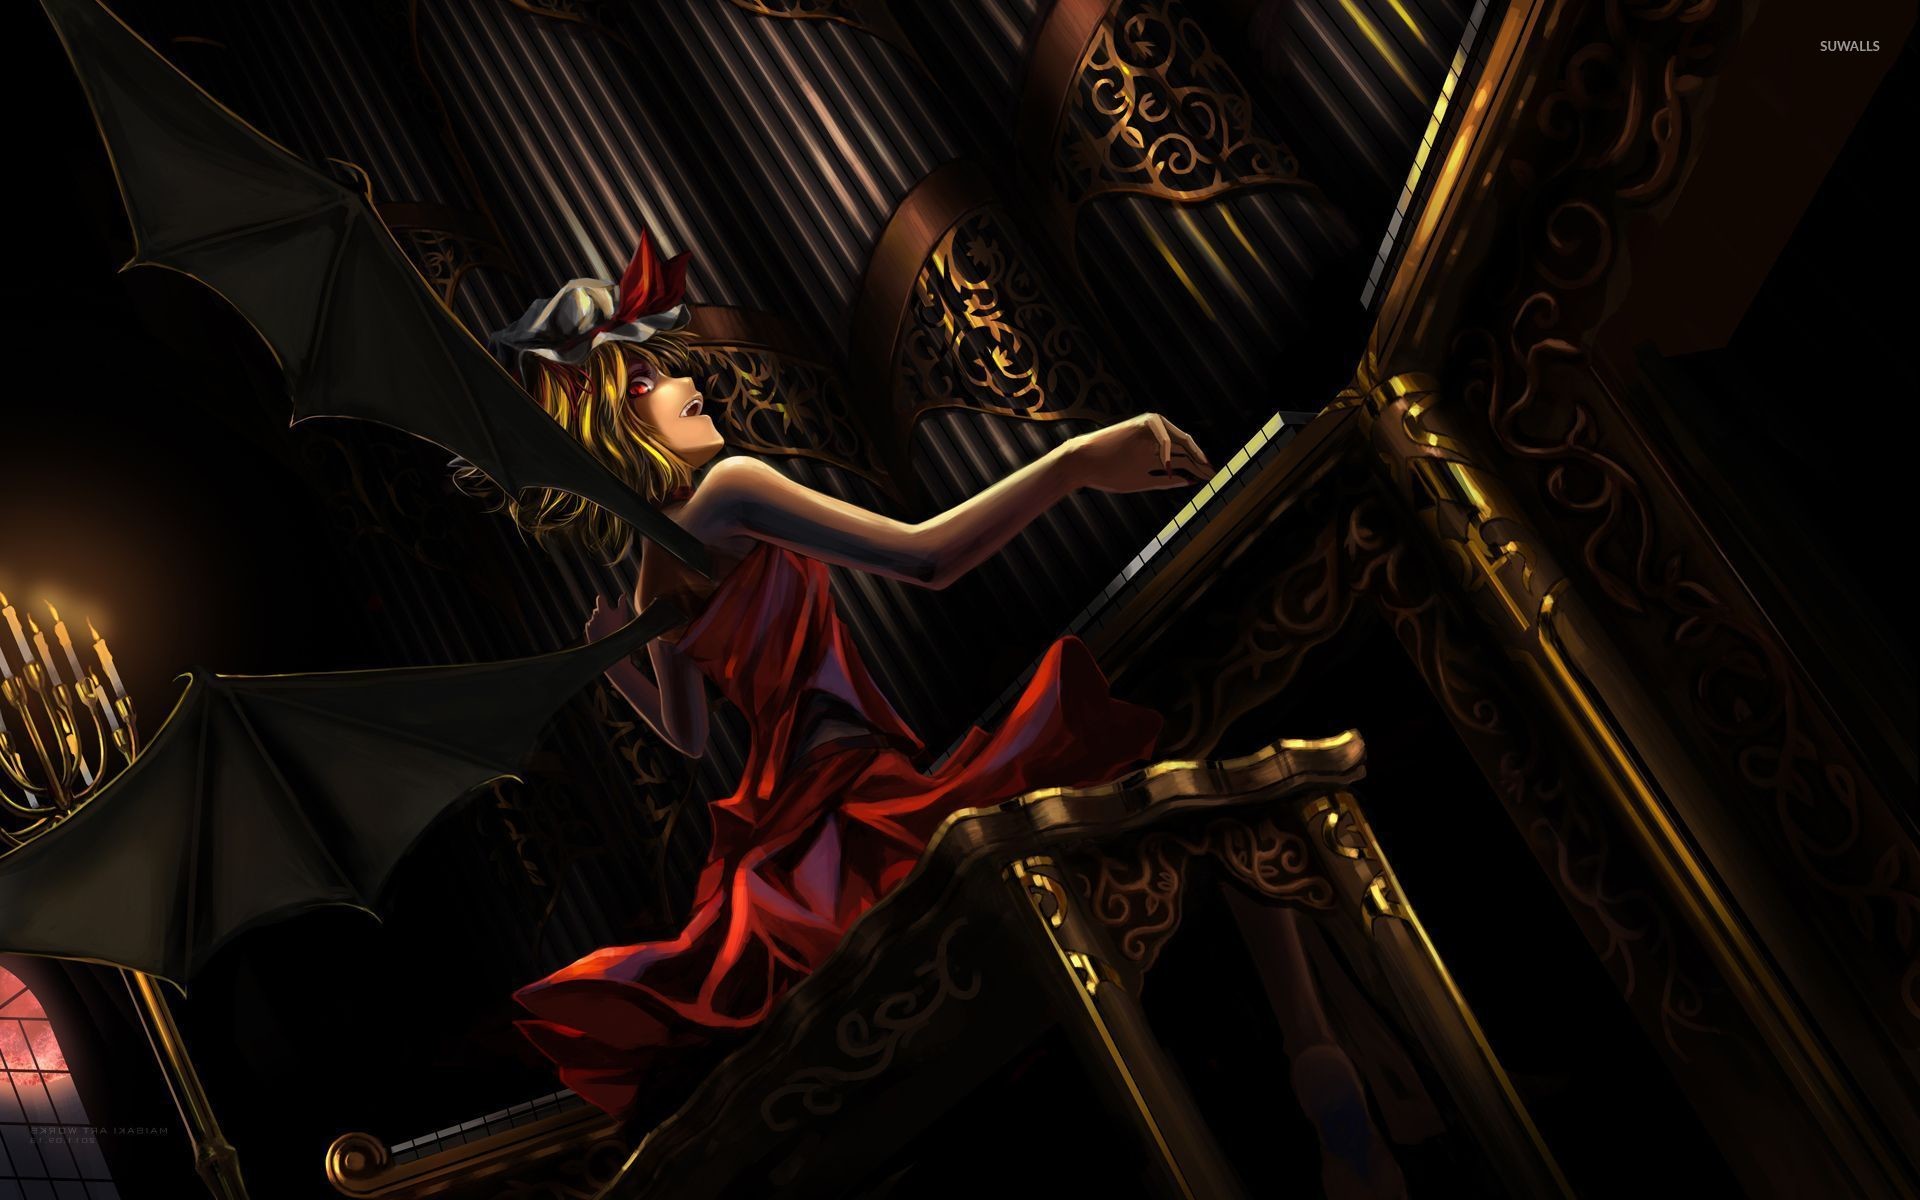 1920x1200 Flandre Scarlet at the piano - Touhou Project wallpaper